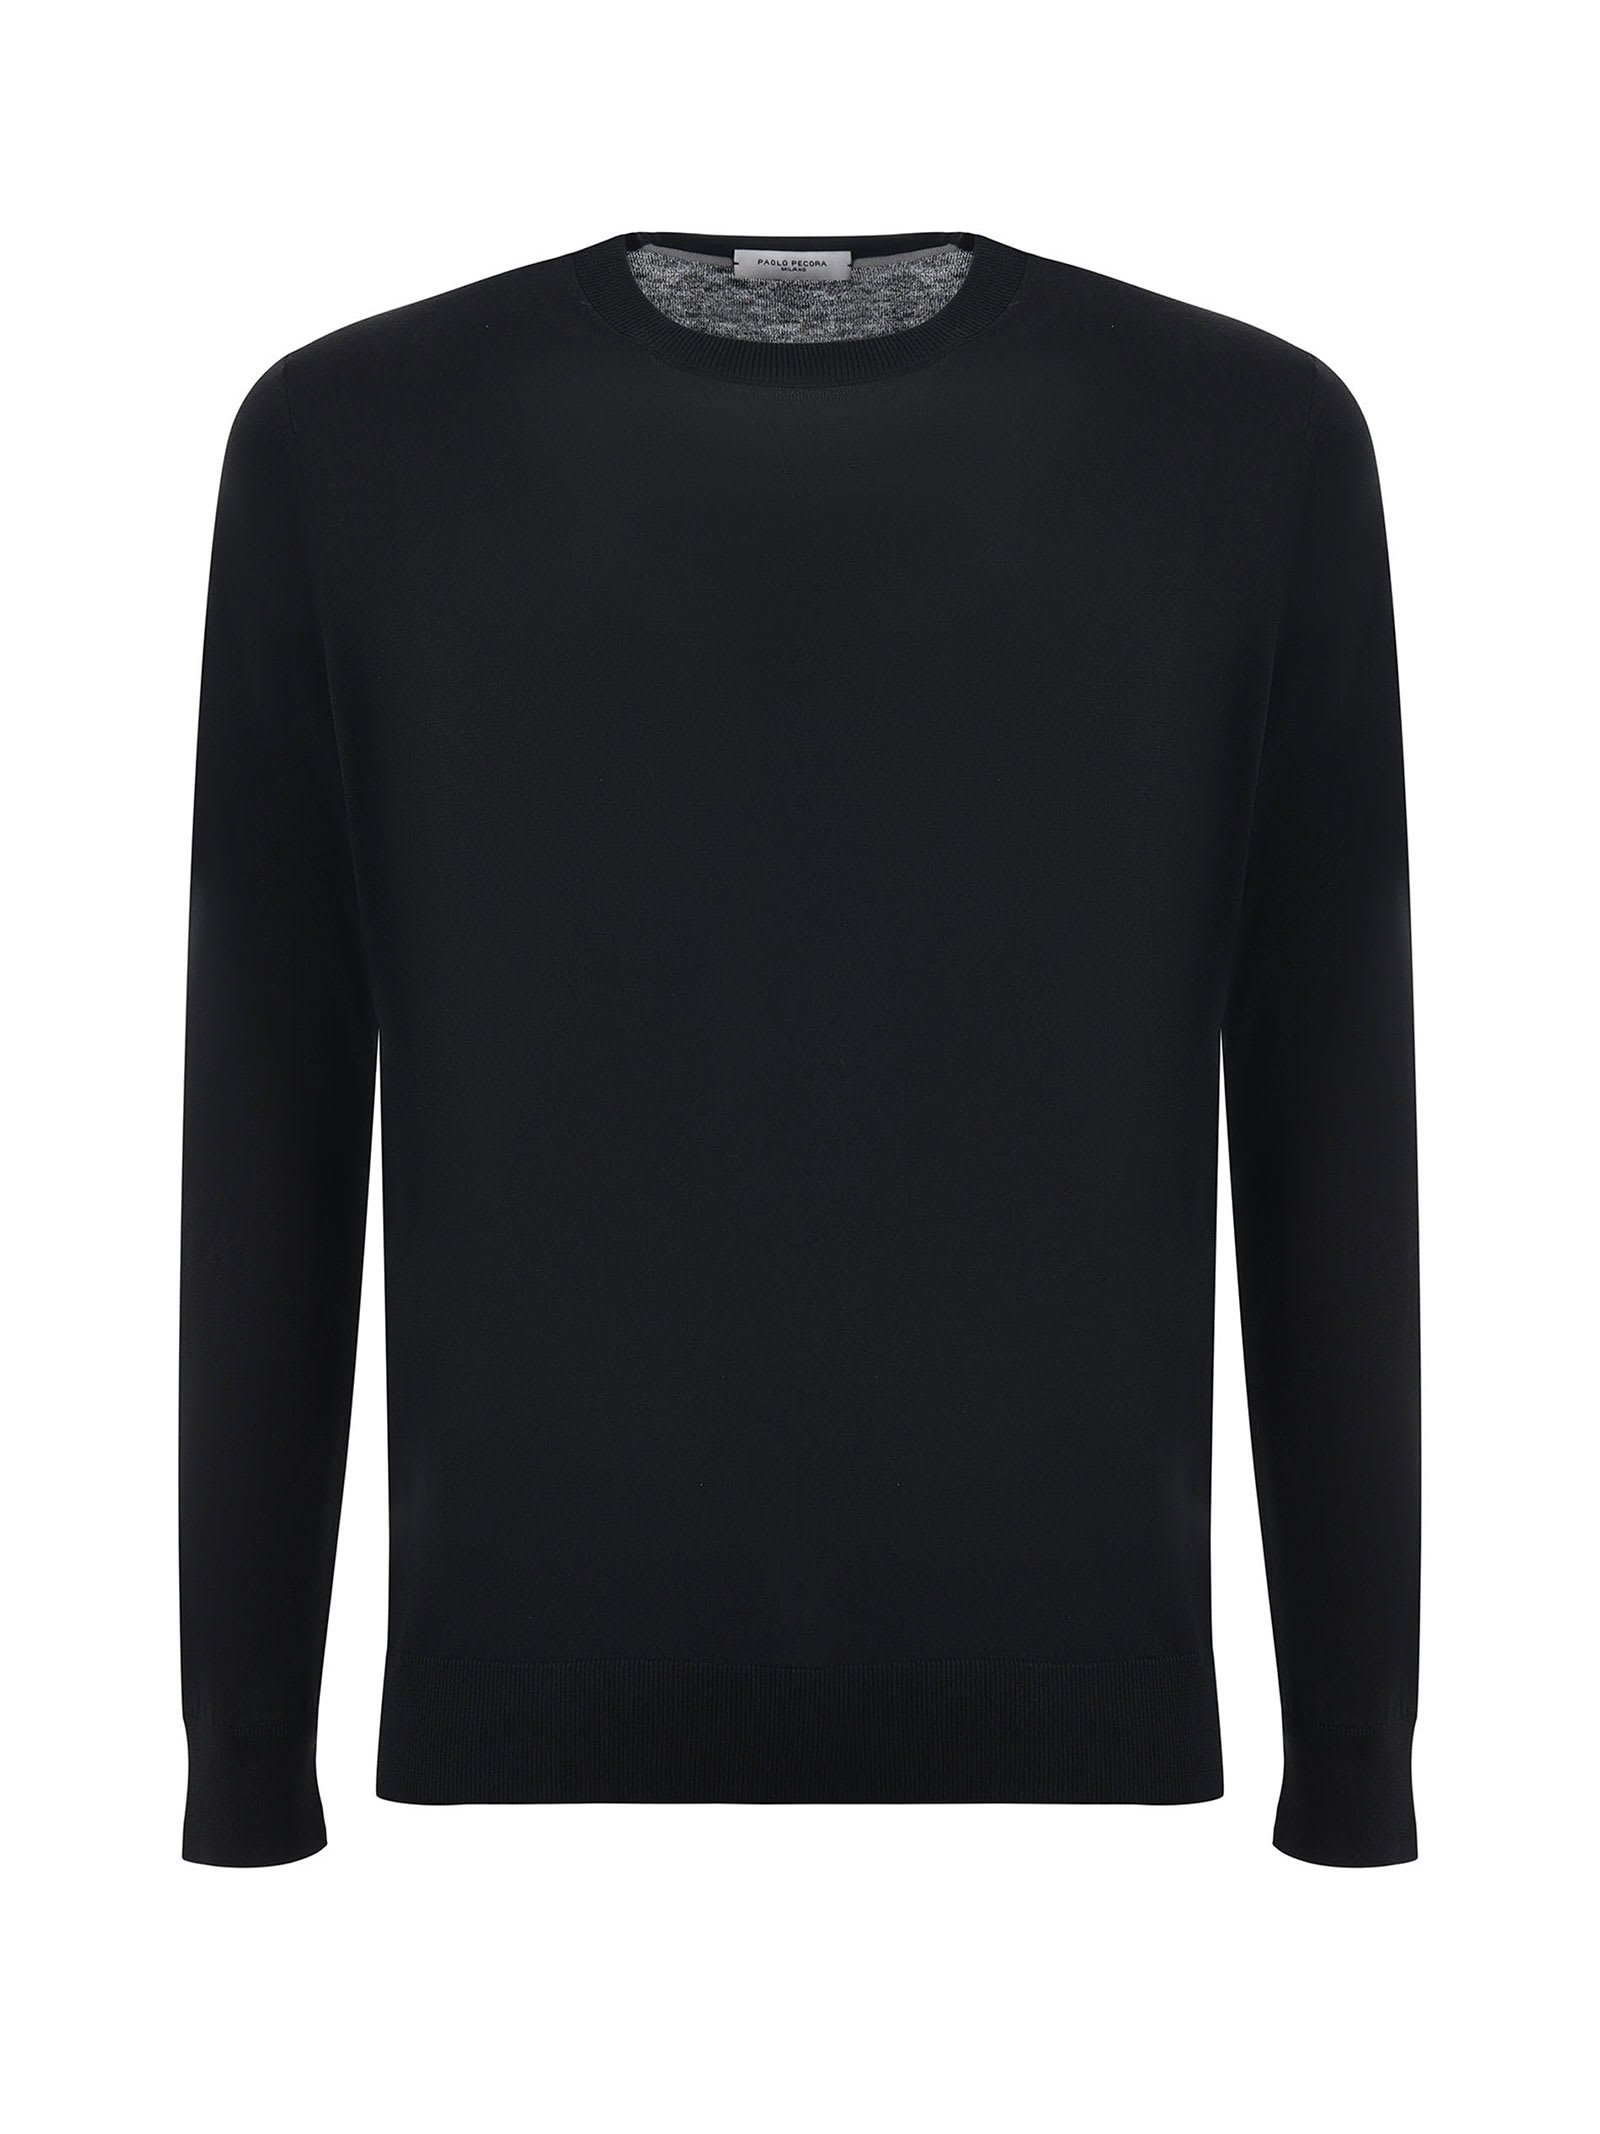 Black Crew-neck Sweater In Cotton And Silk Blend